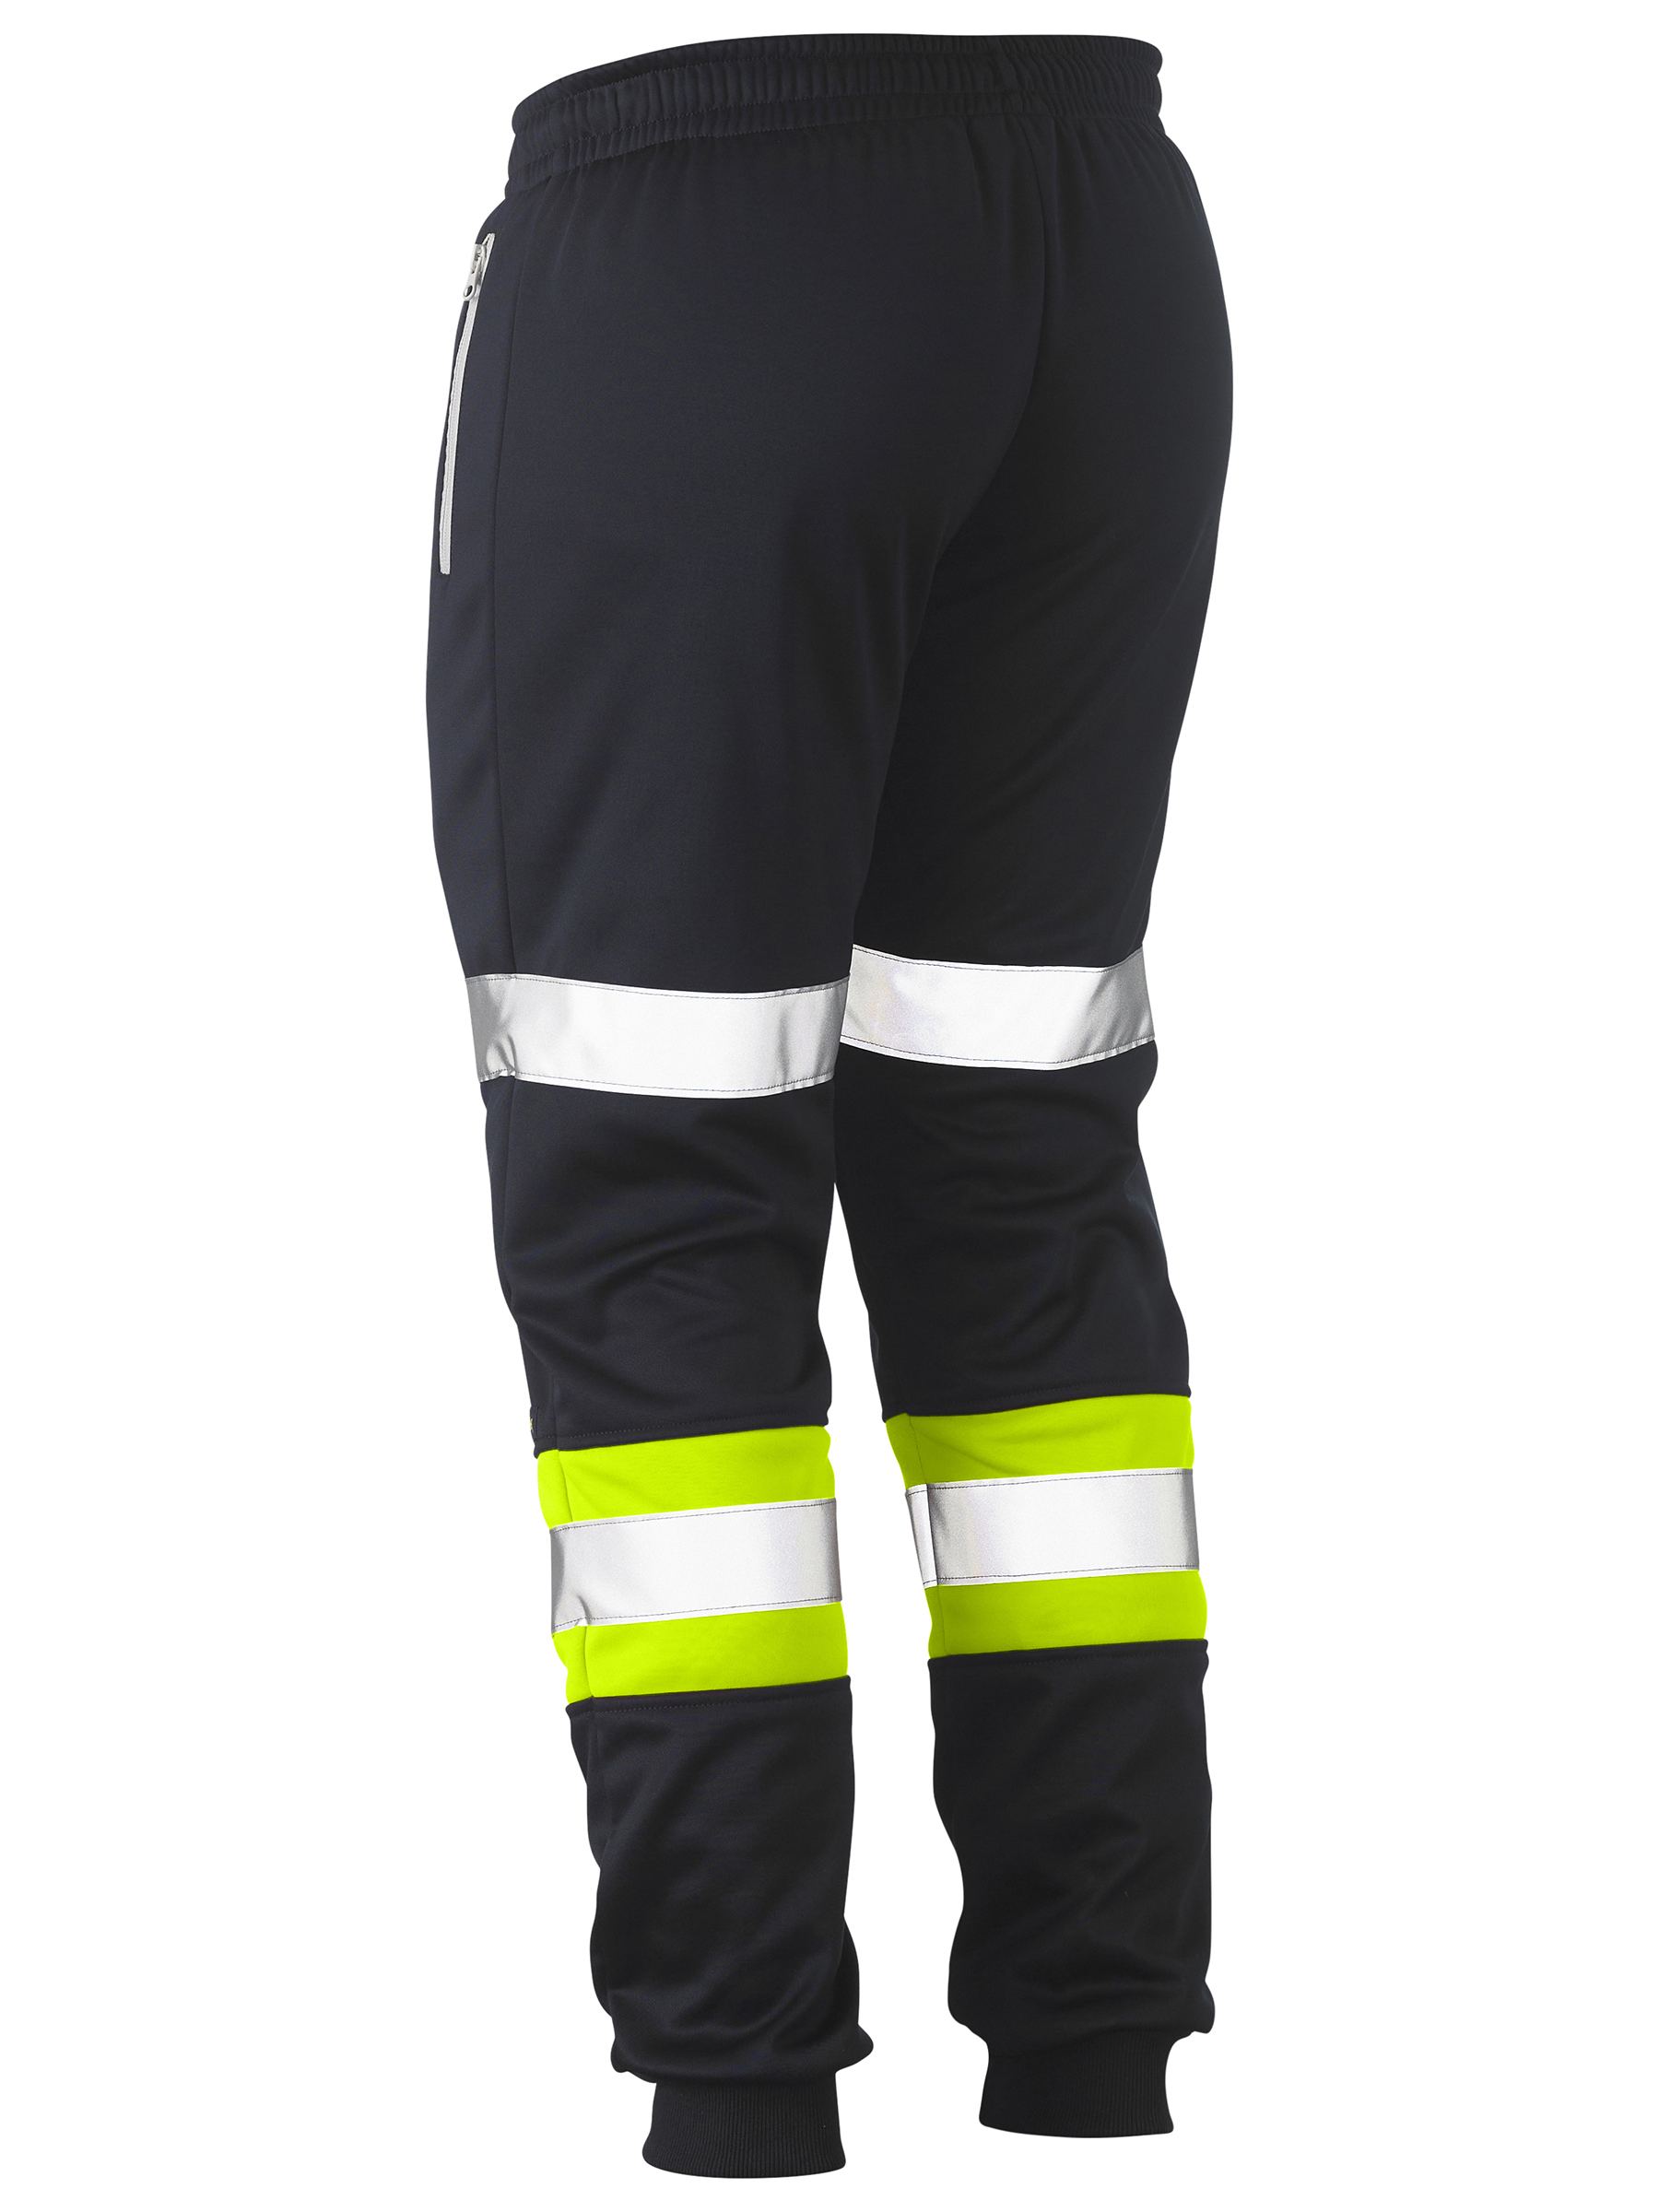 Taped biomotion track BPK6202T Bisley pants full with Workwear drawcord - waist - with elasticised